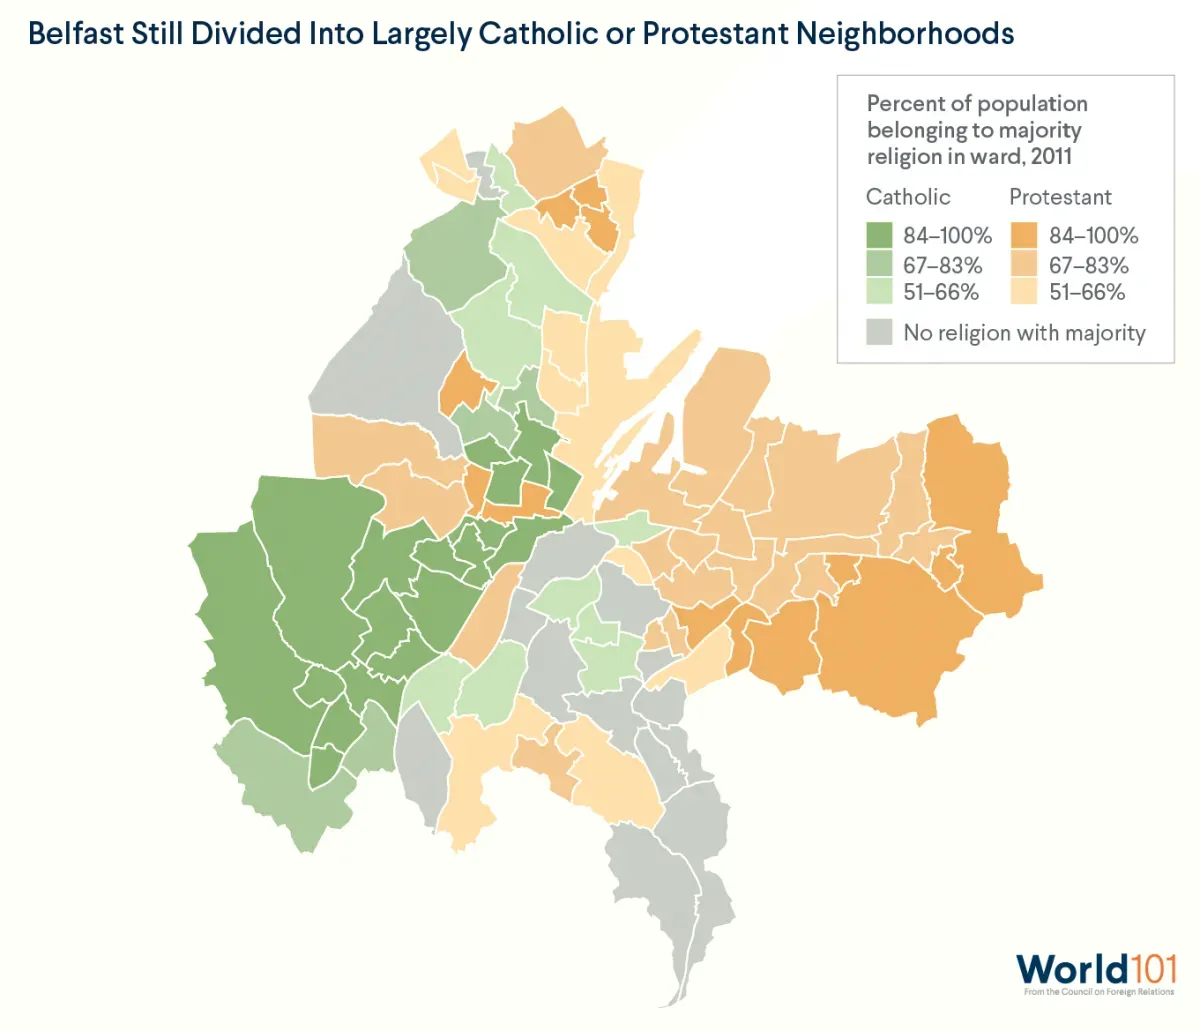 Map showing how, as of 2011, Belfast was still largely divided into largely Catholic or Protestant neighborhoods. For more info contact us at world101@cfr.org.